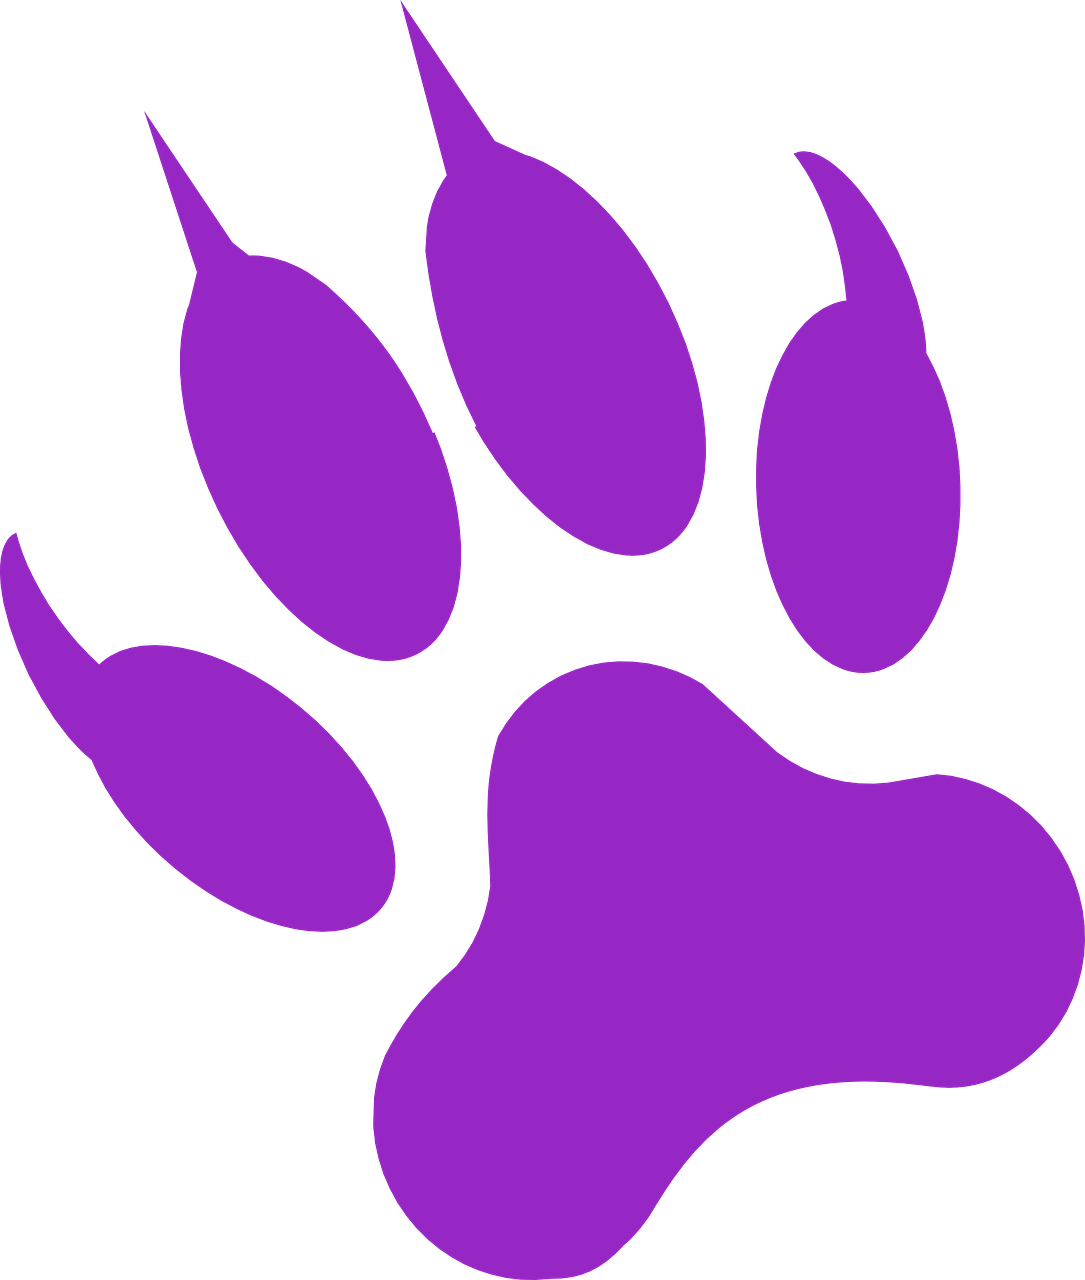 Paw Print Wolf vector graphic